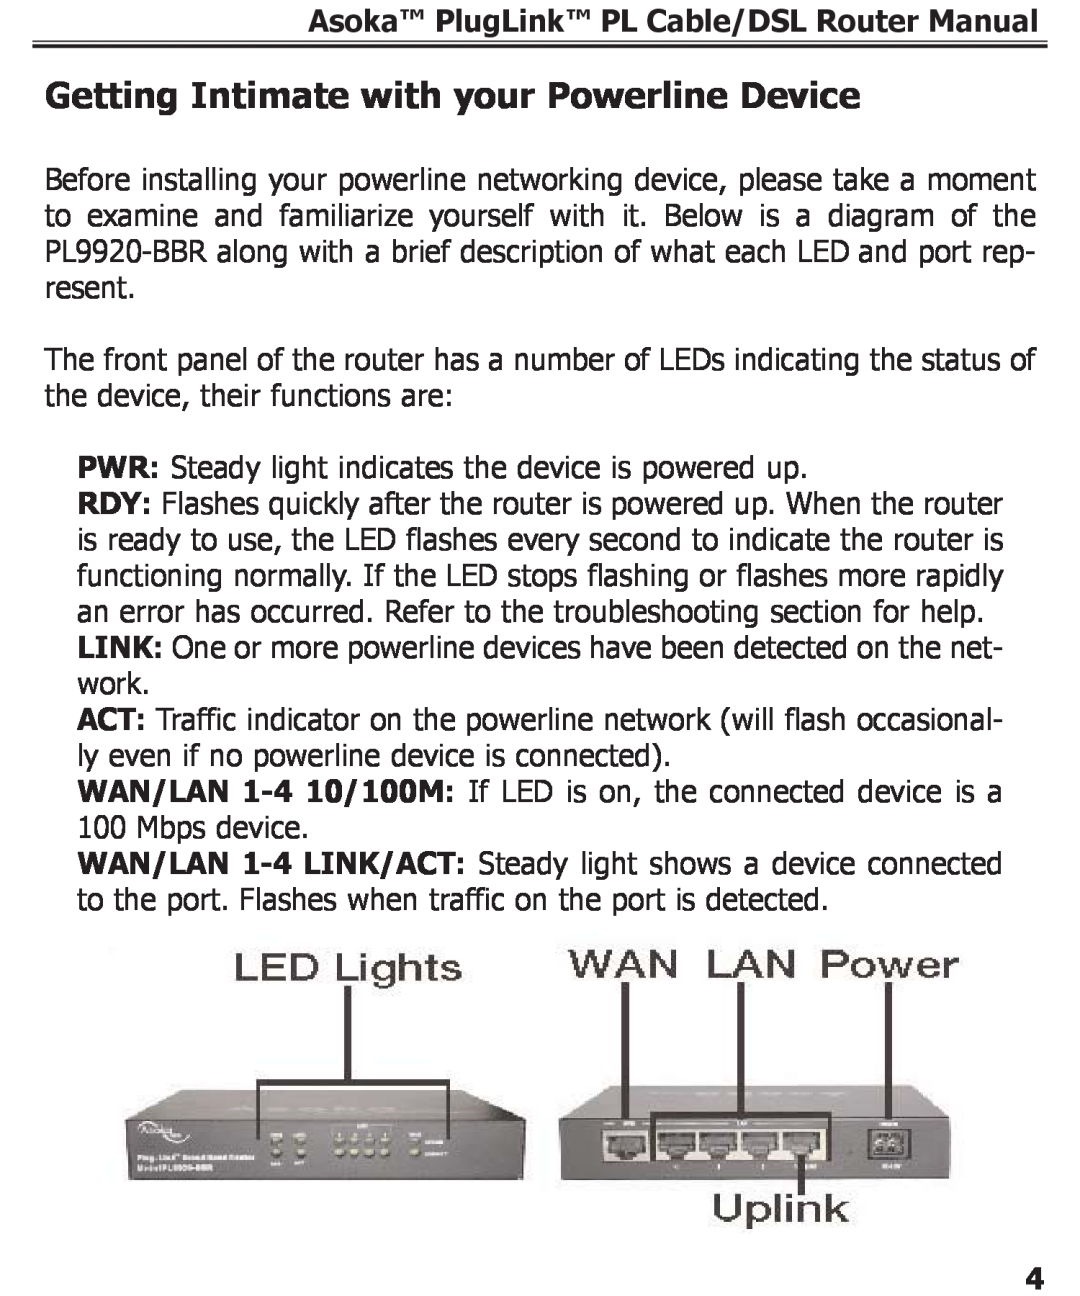 Asoka PL9920-BBR specifications Getting Intimate with your Powerline Device, Asoka PlugLink PL Cable/DSL Router Manual 